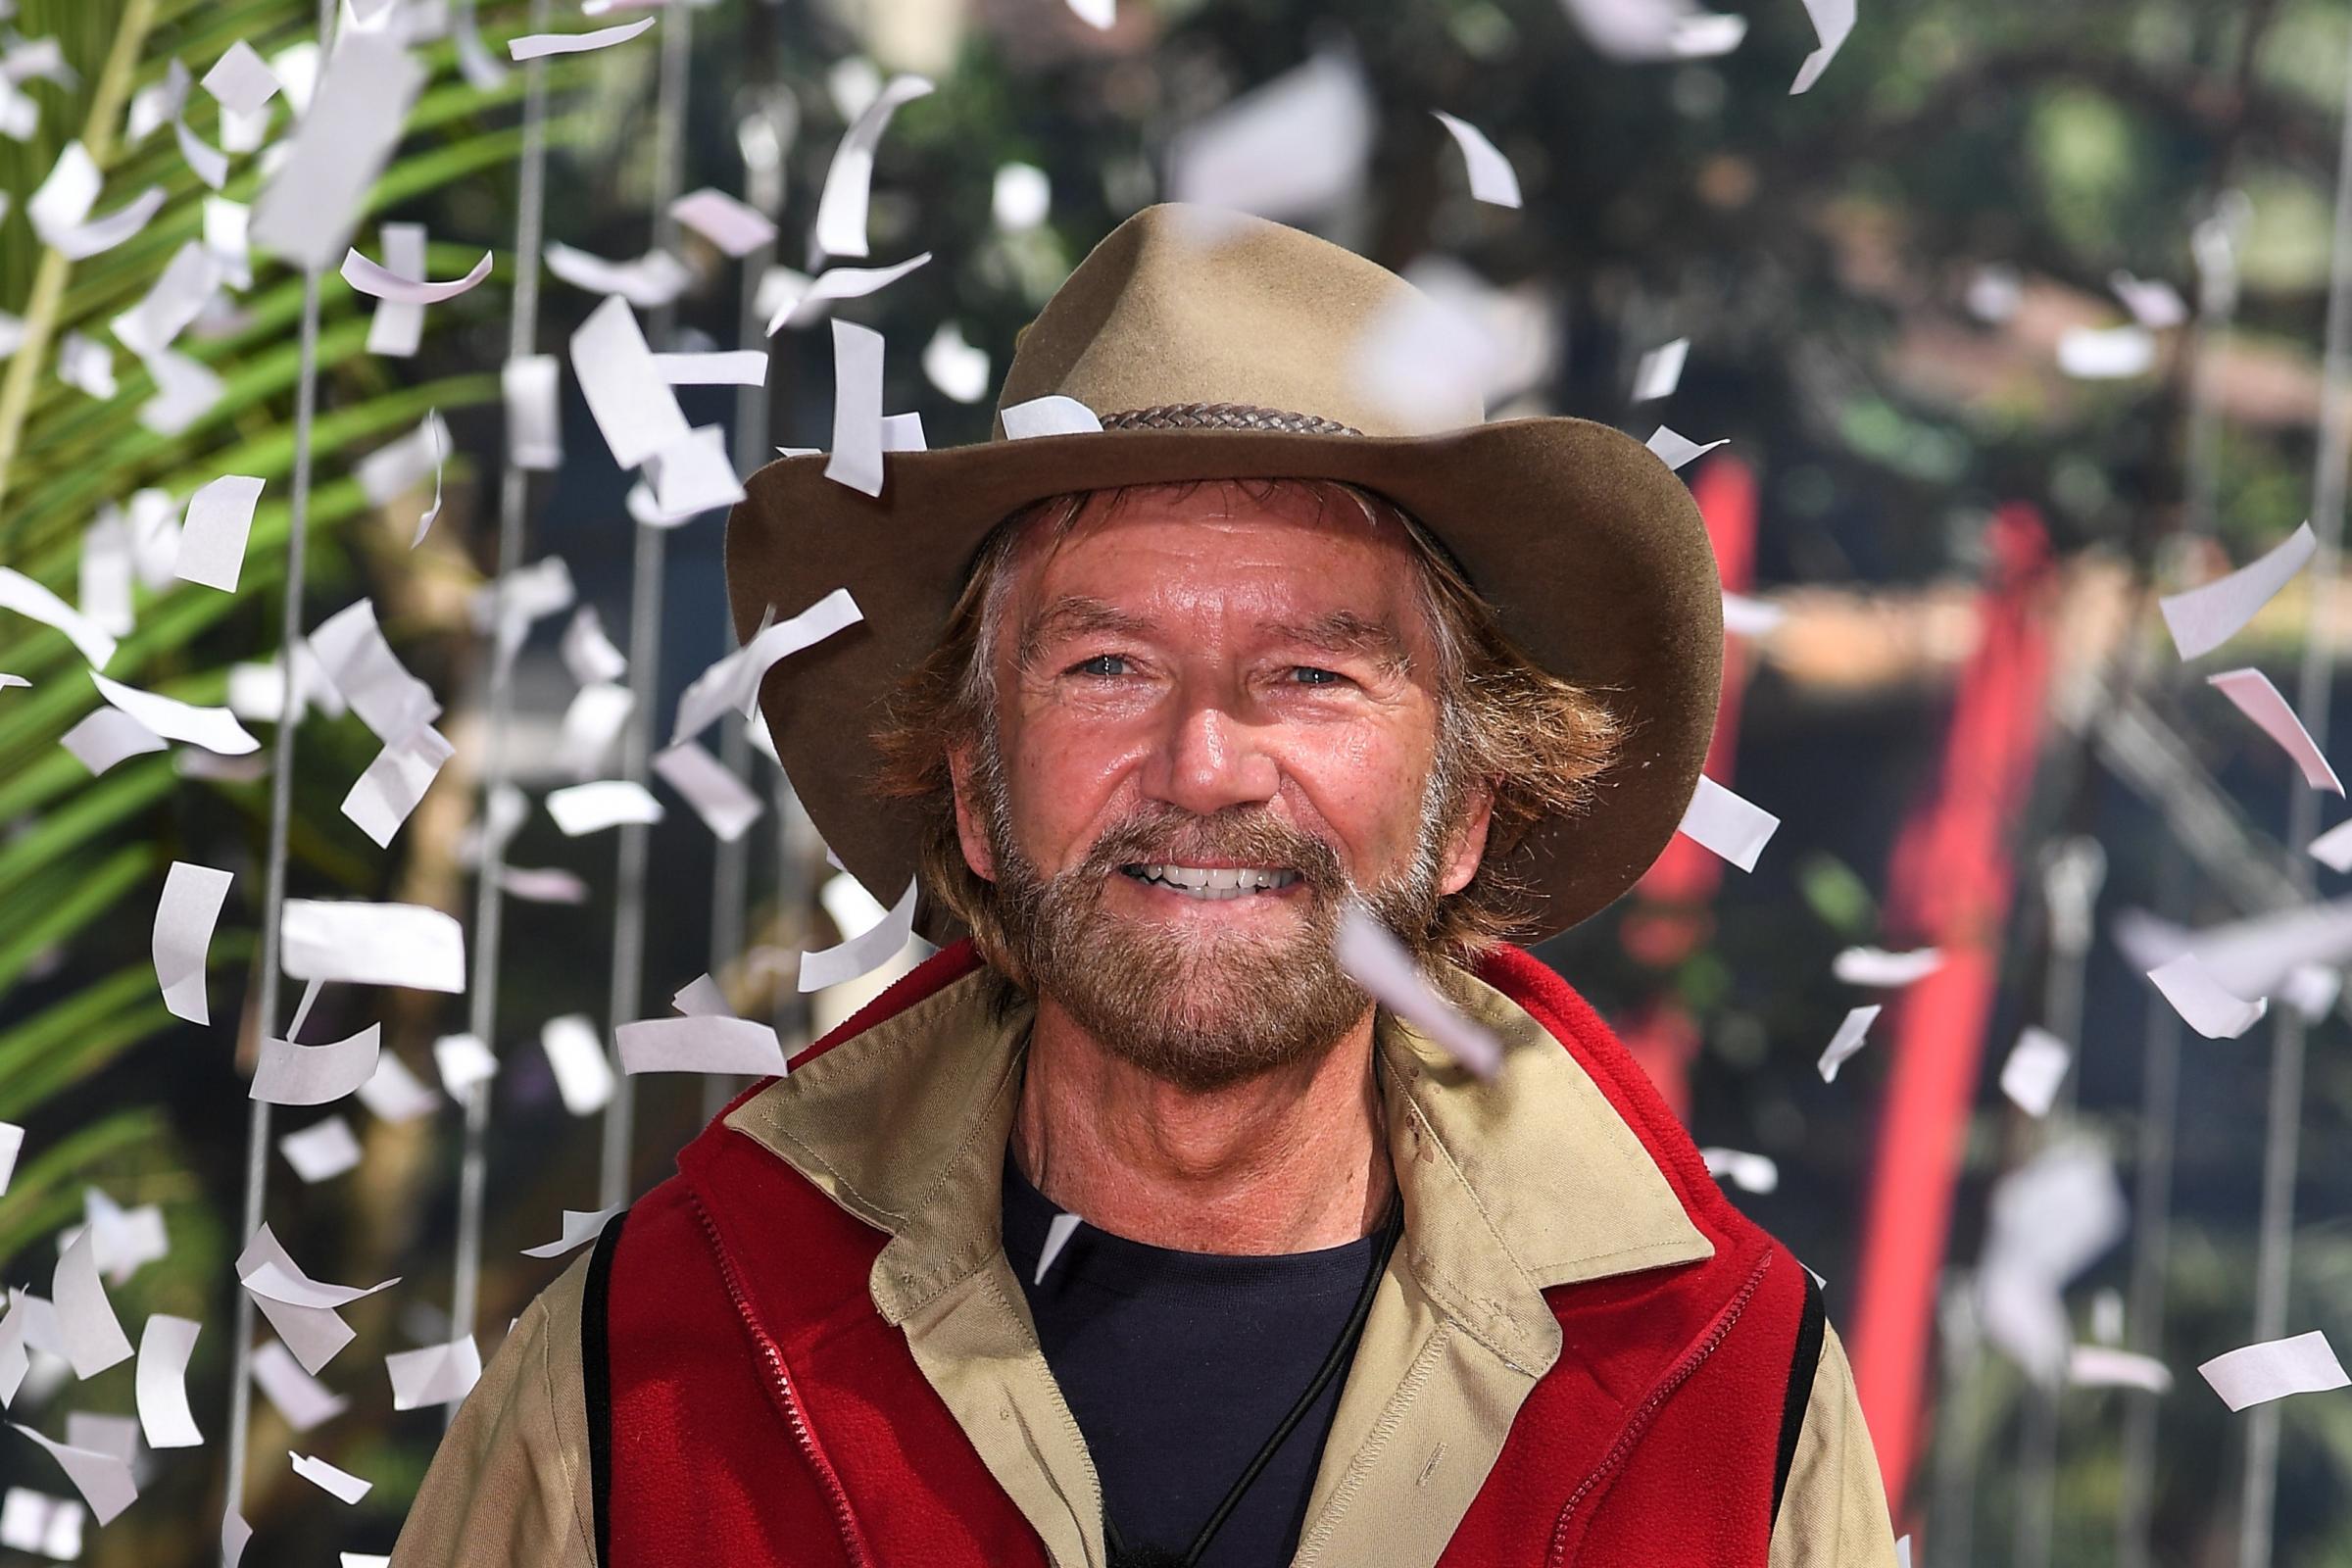 Noel Edmonds becomes first contestant to exit I’m A Celebrity after public vote